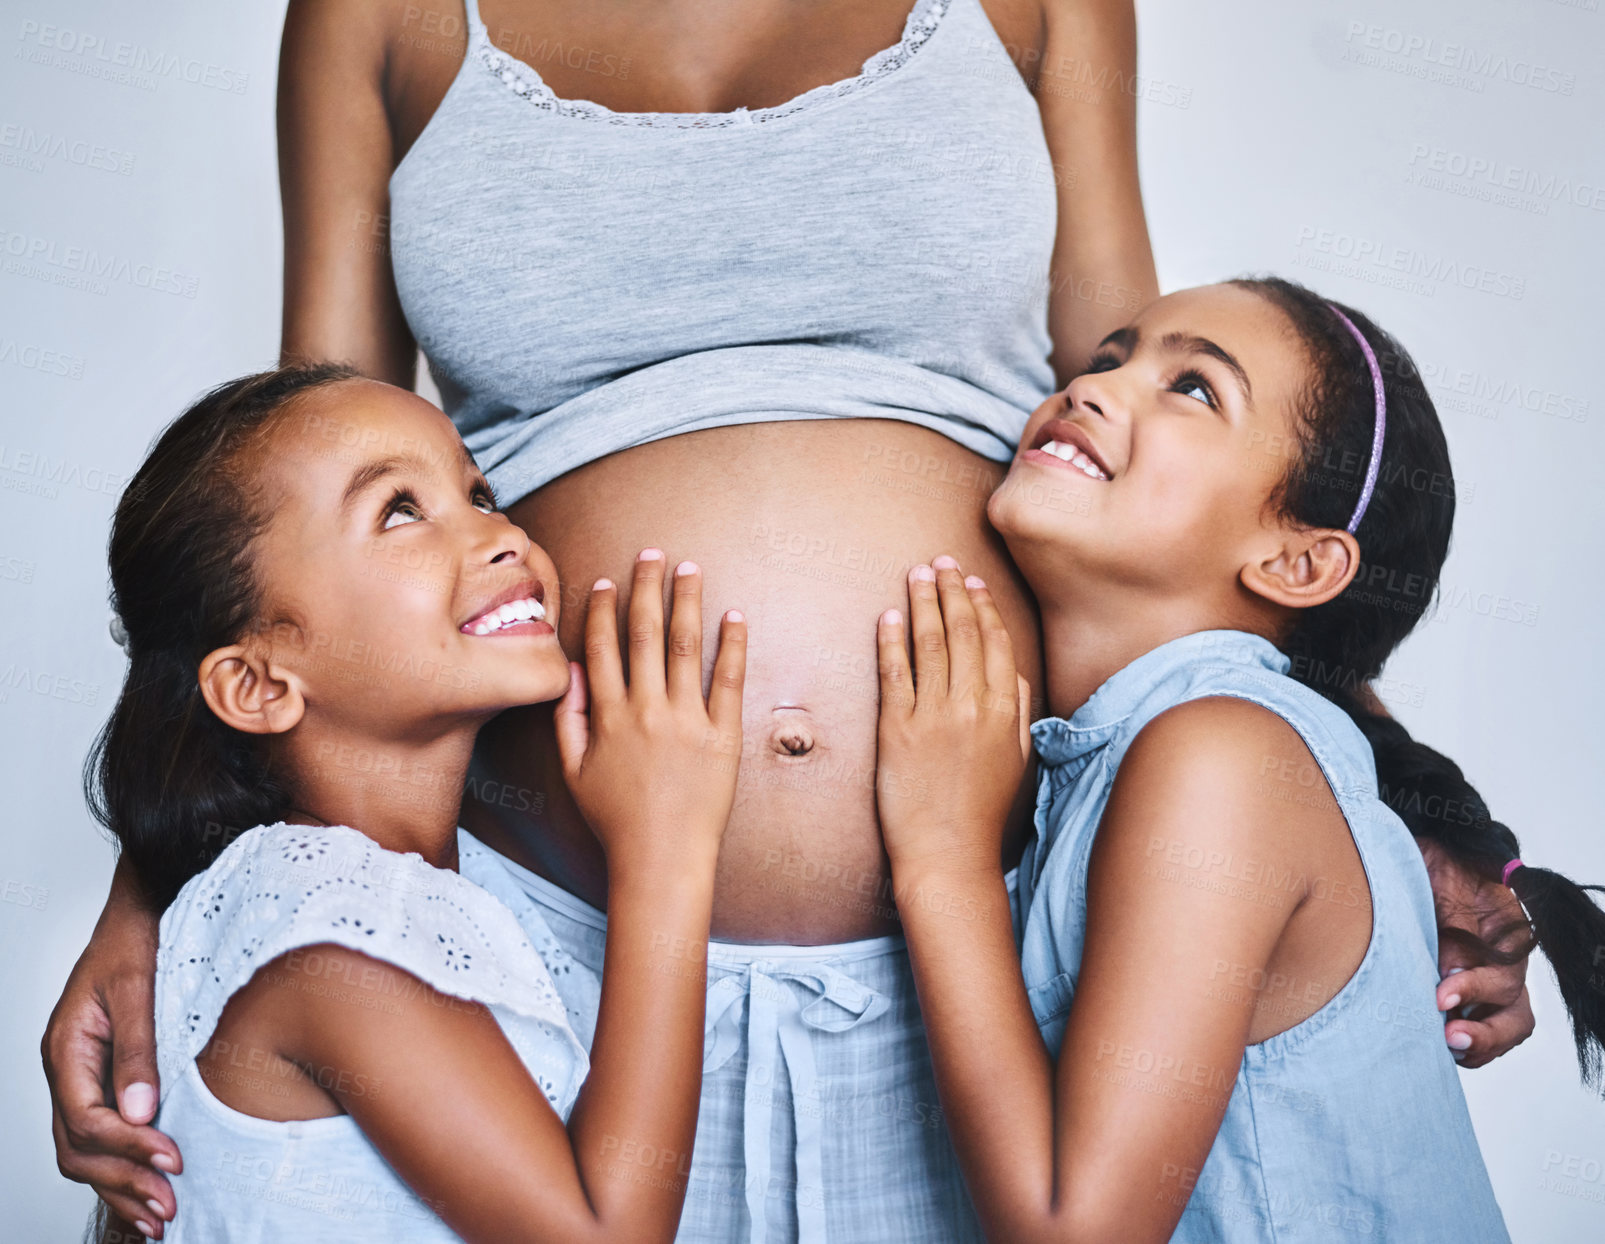 Buy stock photo Shot of two cheerful little girls standing next to their pregnant mother at home during the day